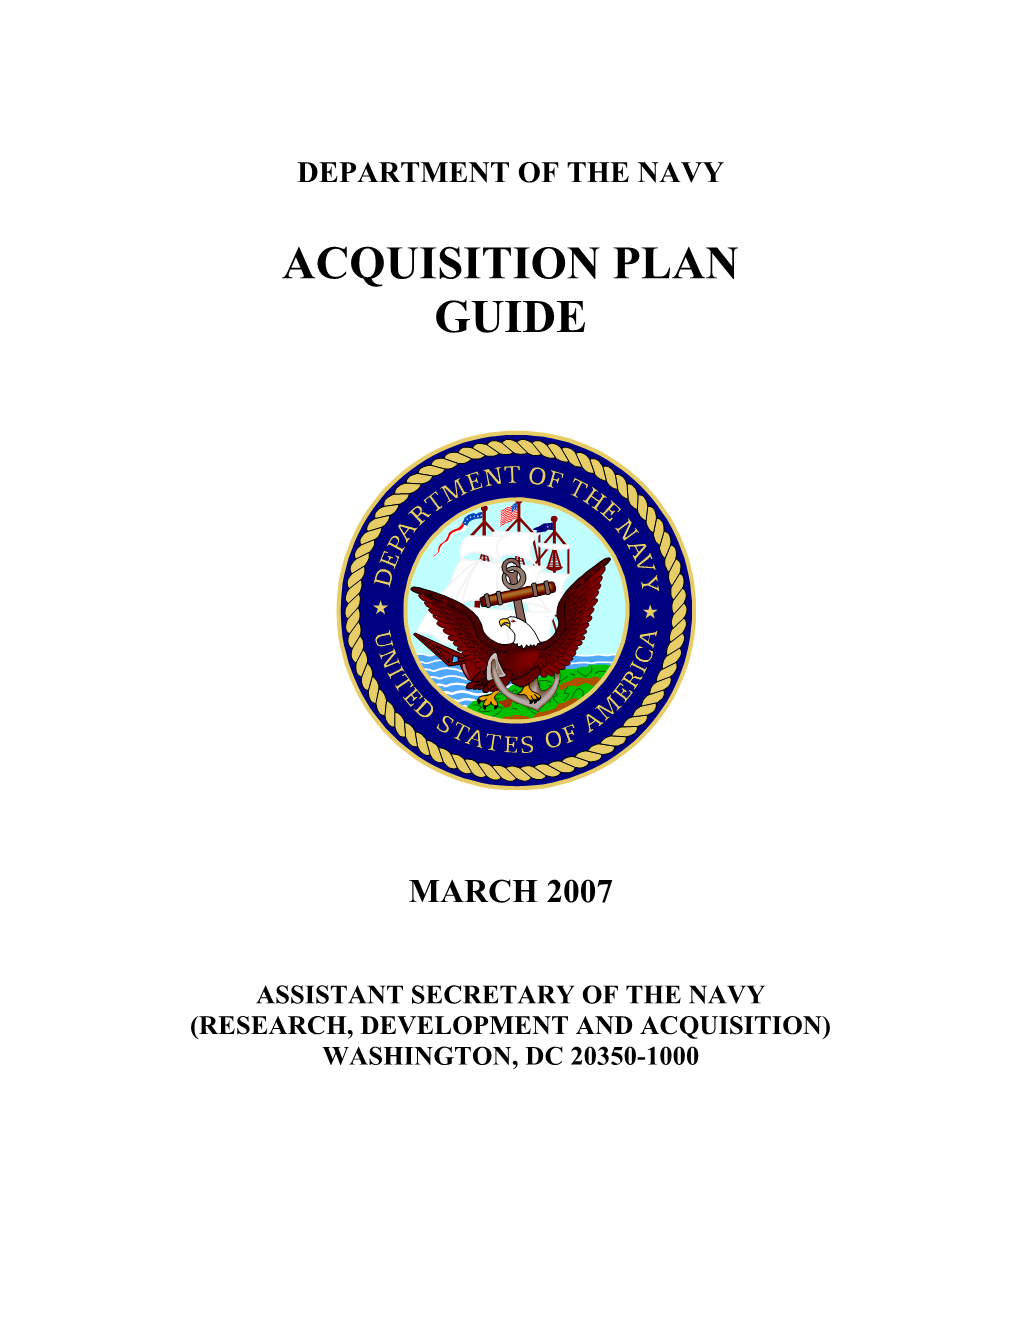 Acquisition Plan Guide (APG)